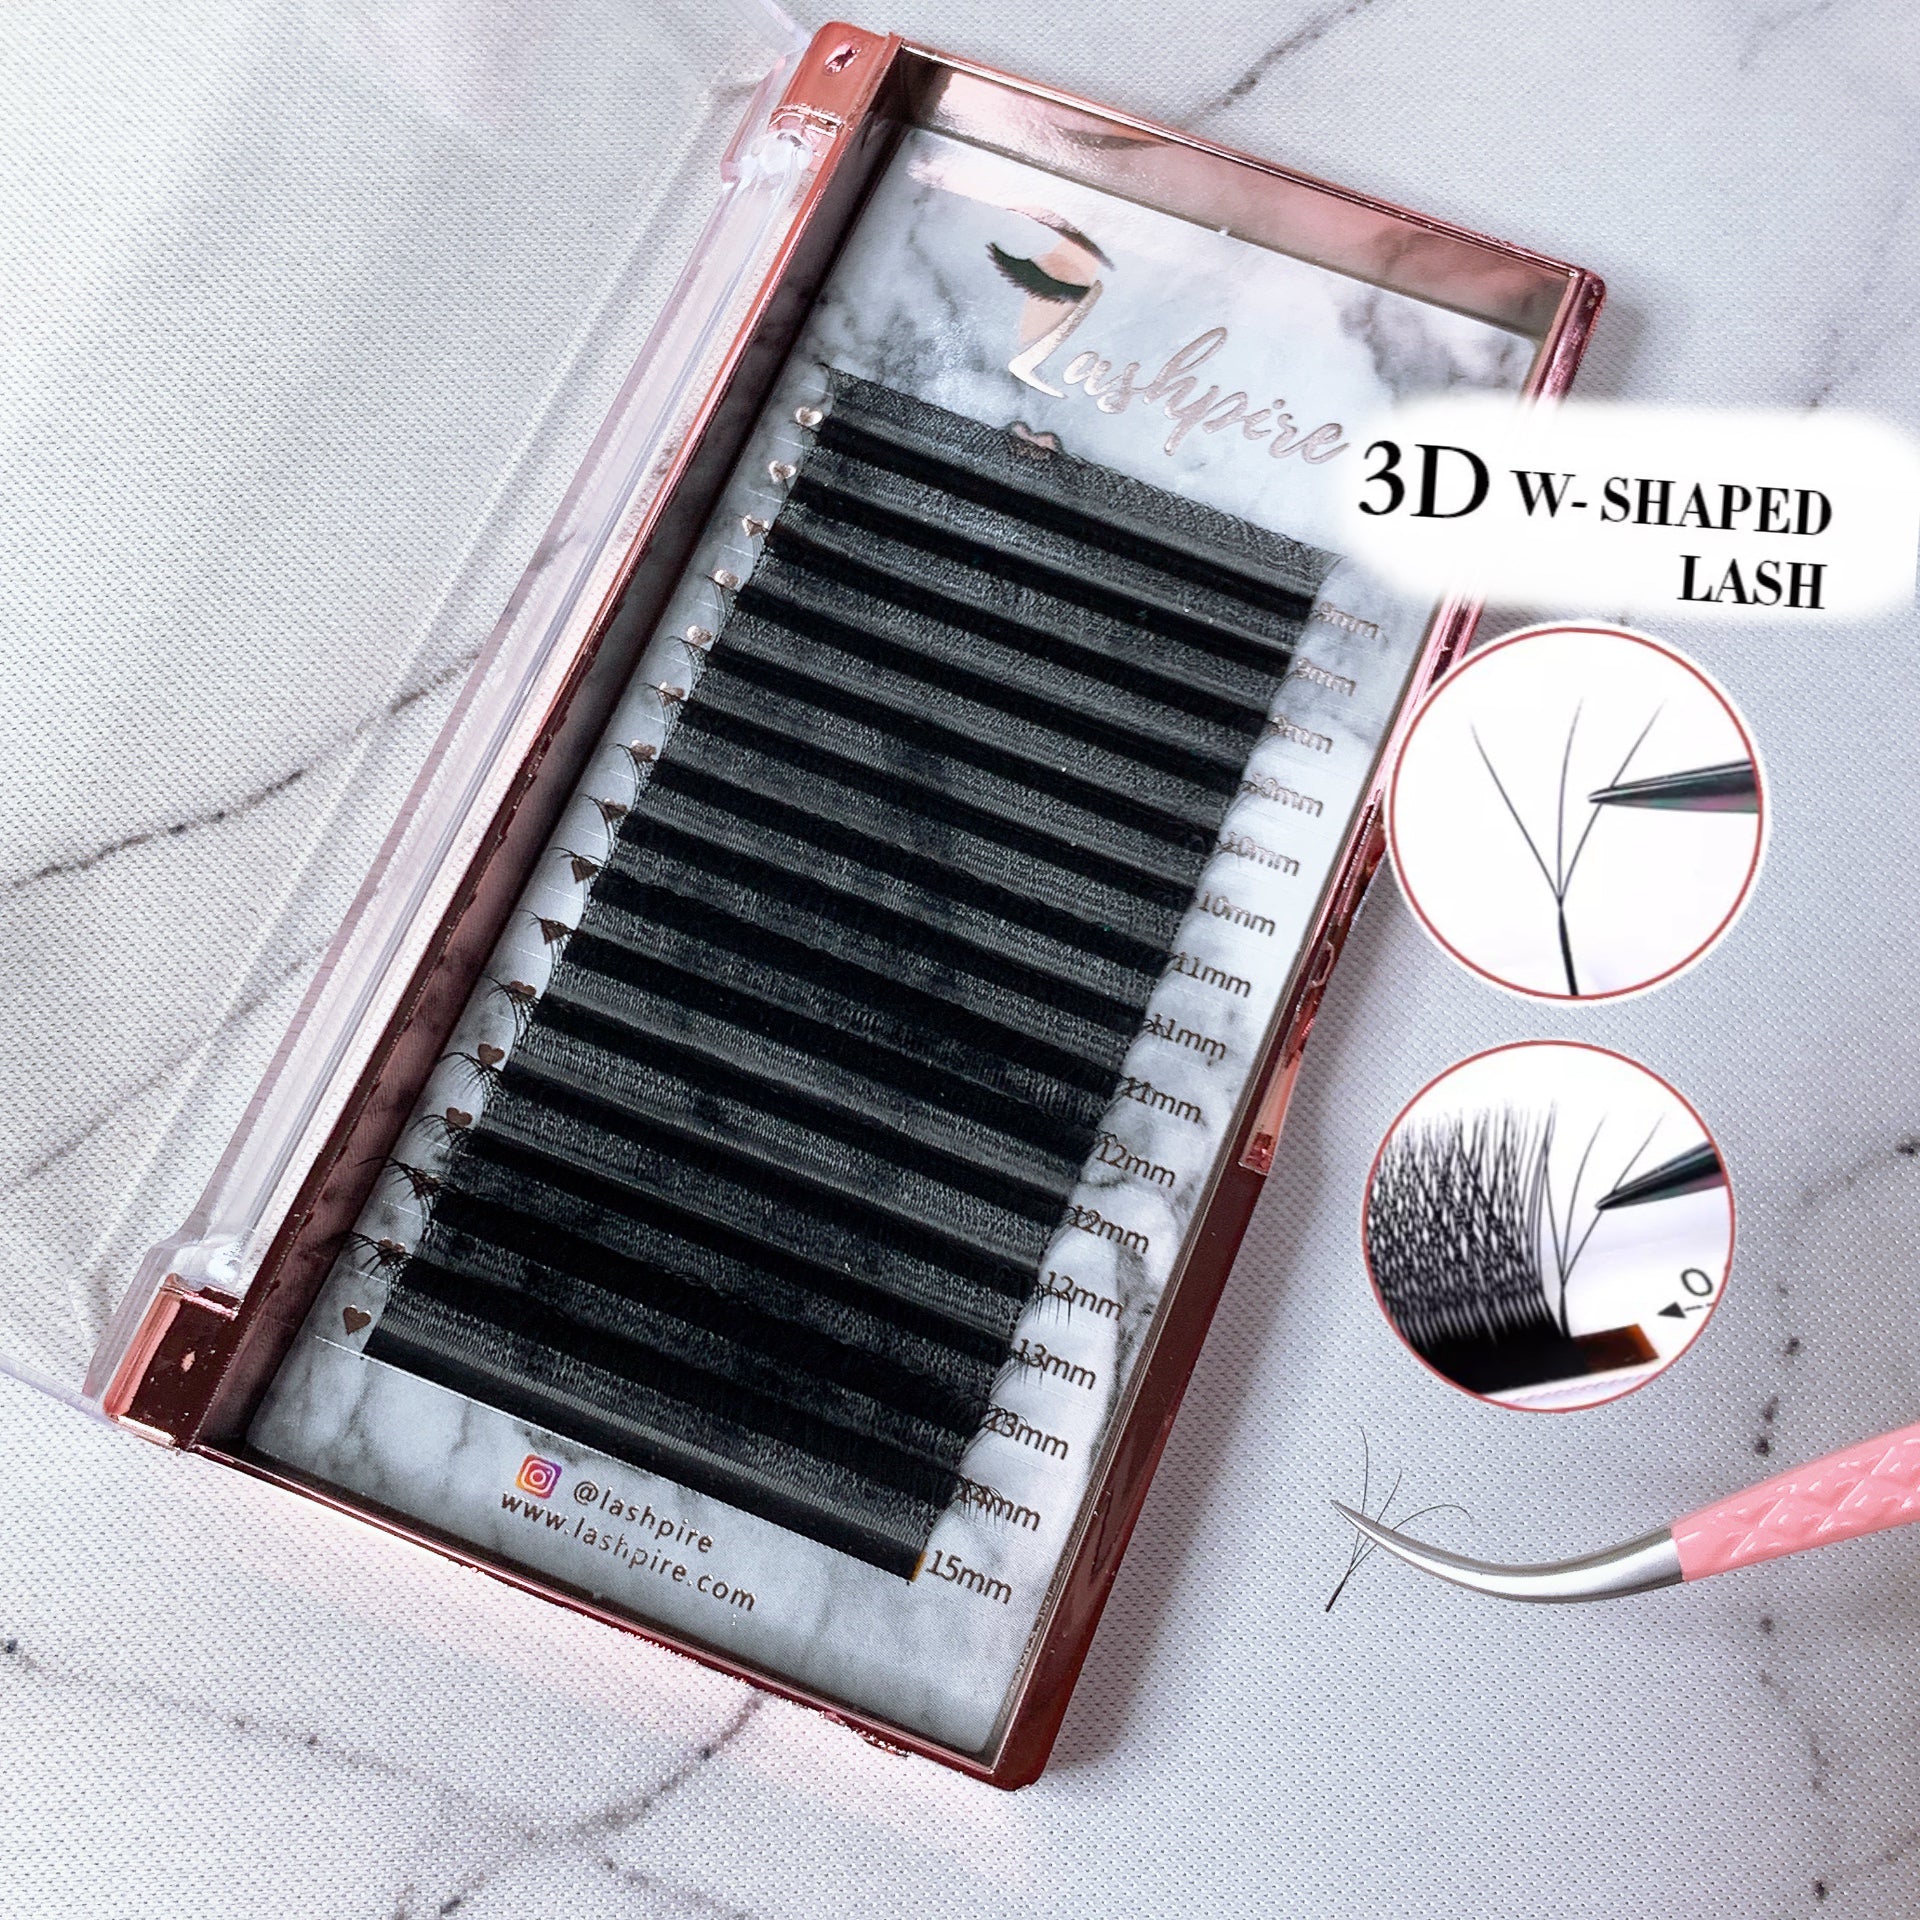 0.07mm MIX LENGTH Fairy Three-leaf Clover Auto Flowering W-shaped 3D Premade Volume Lash Tray